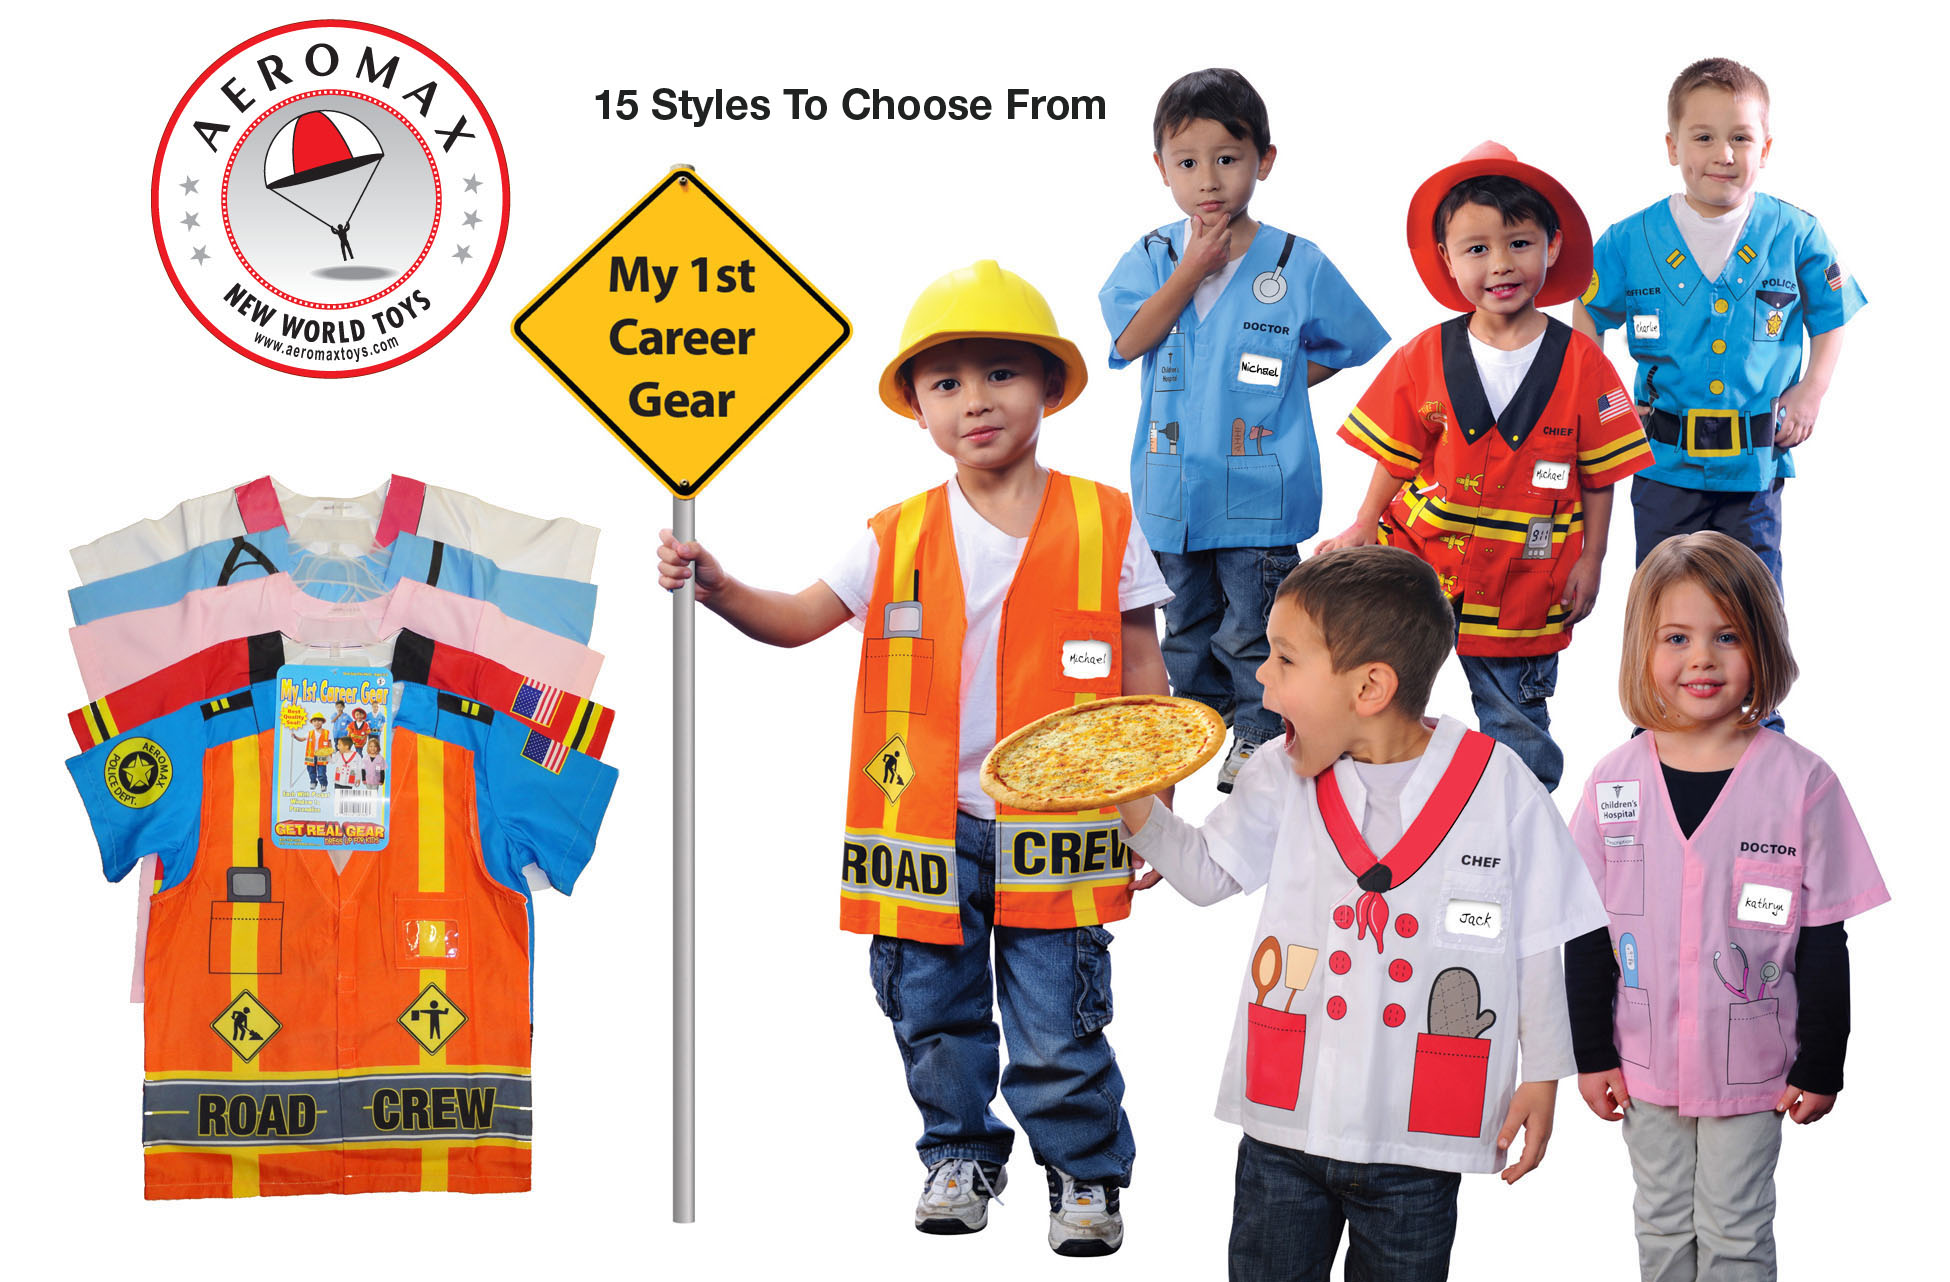 My 1st Career Gear from Aeromax. 15 different styles to choose from. Ages 3-6 by Aeromax, Inc.